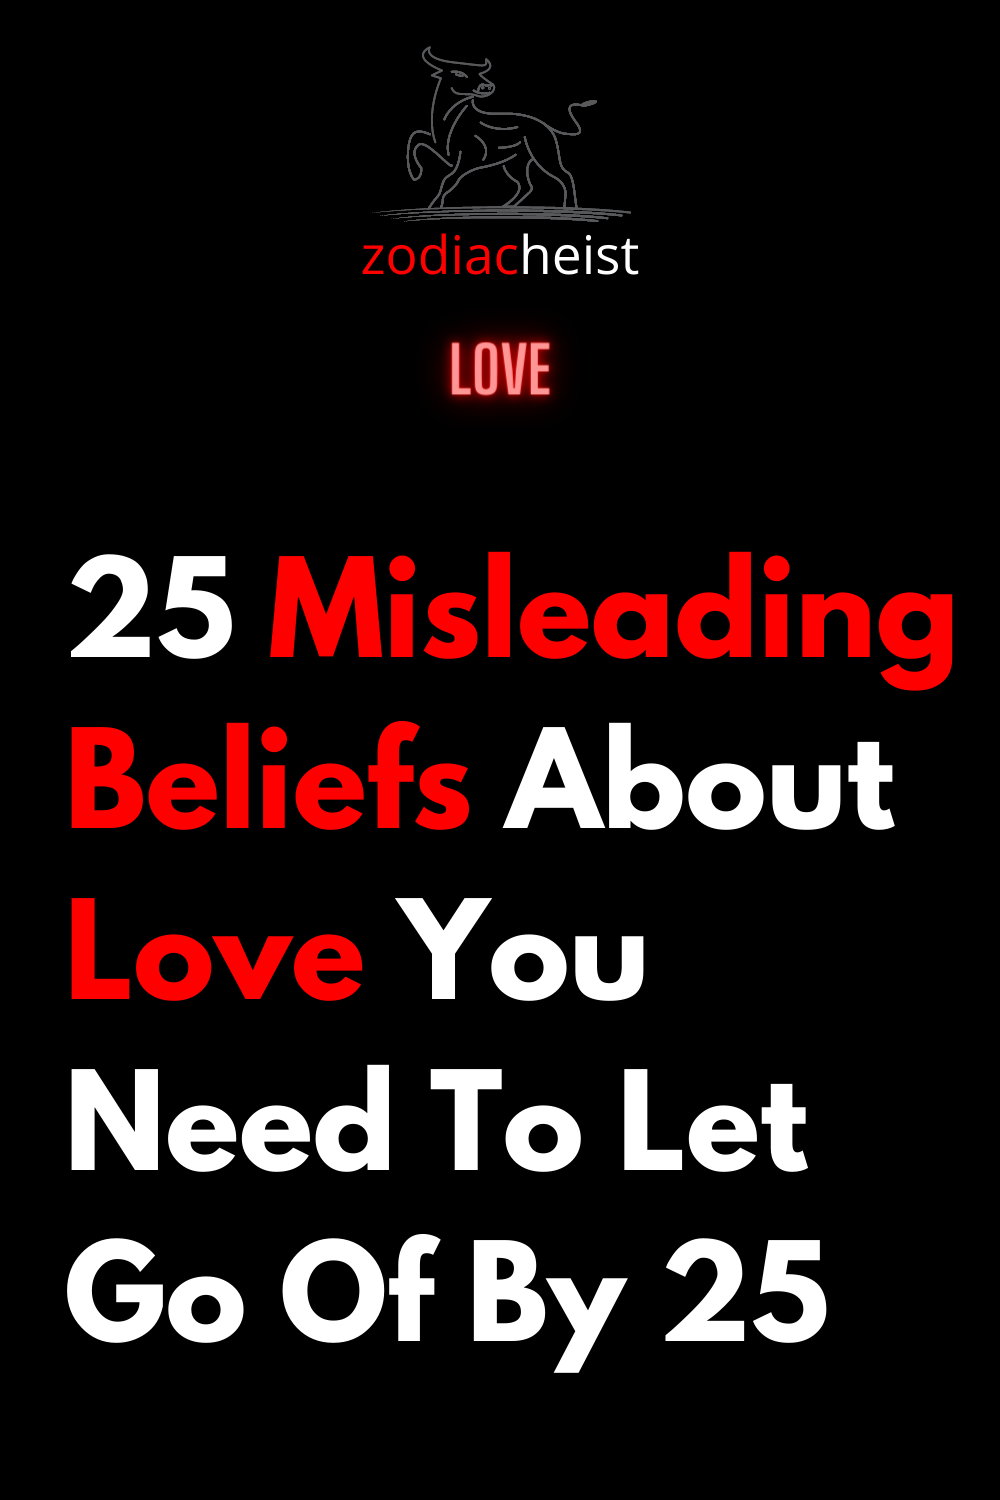 25 Misleading Beliefs About Love You Need To Let Go Of By 25